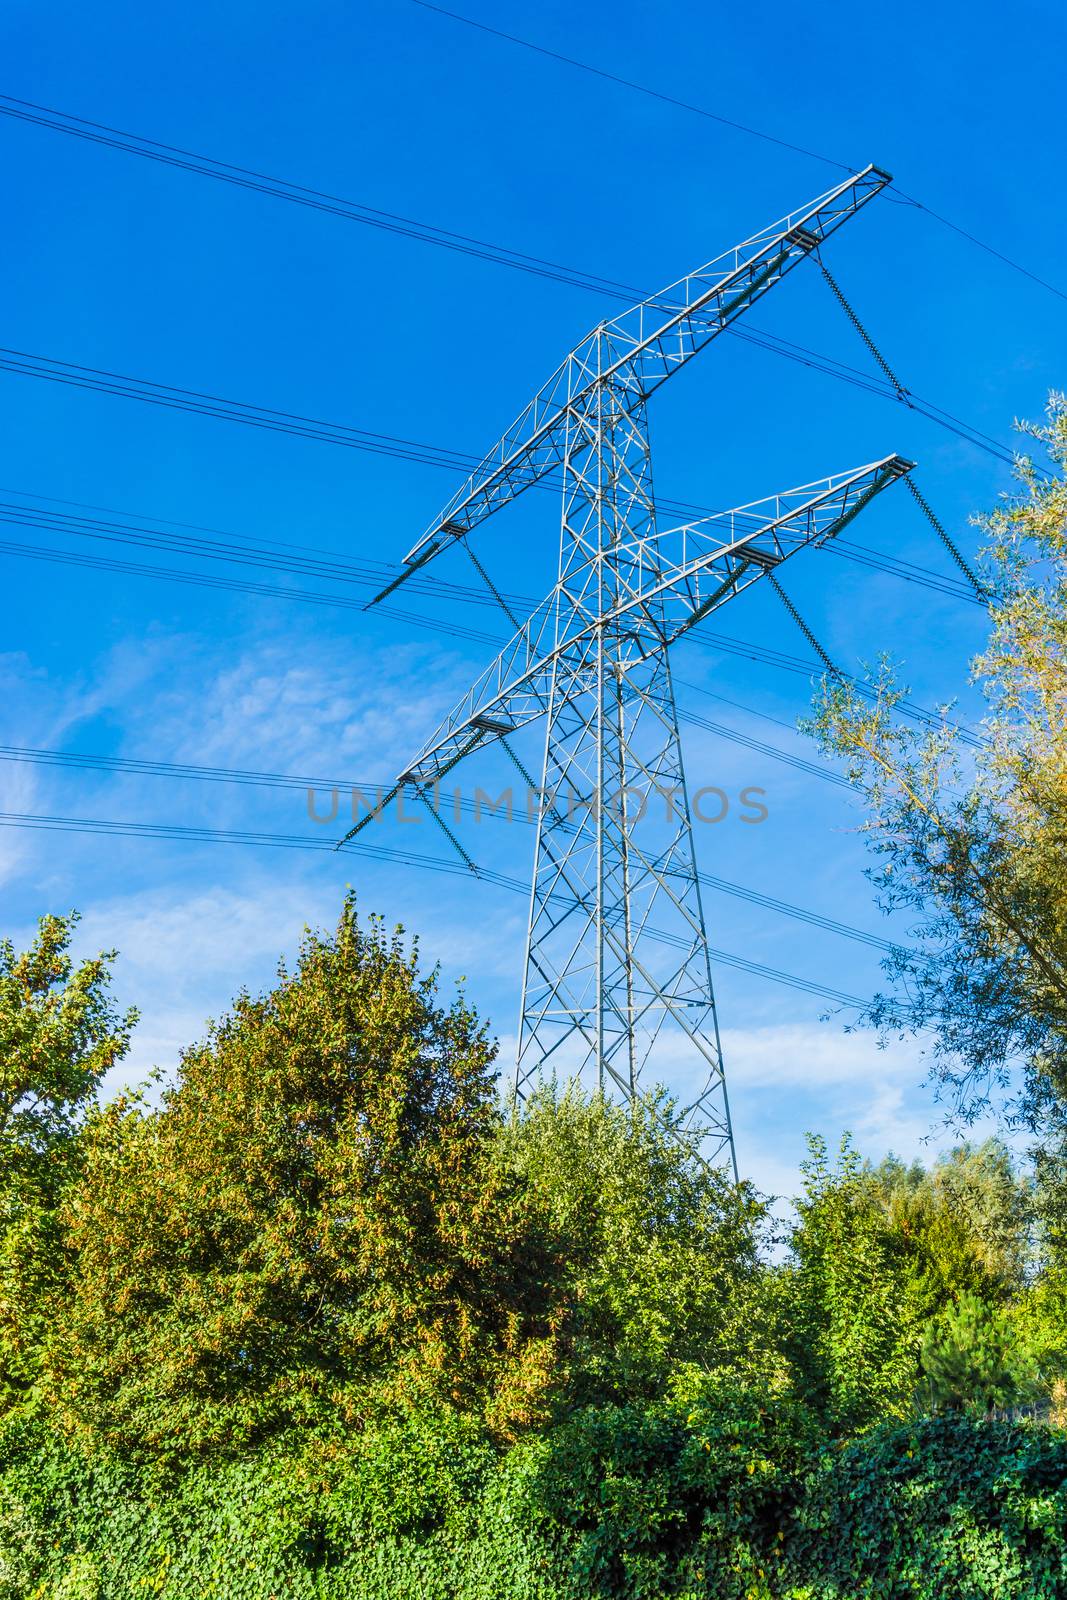 steel electricity power tower construction in a nature landscape with blue sky by charlottebleijenberg